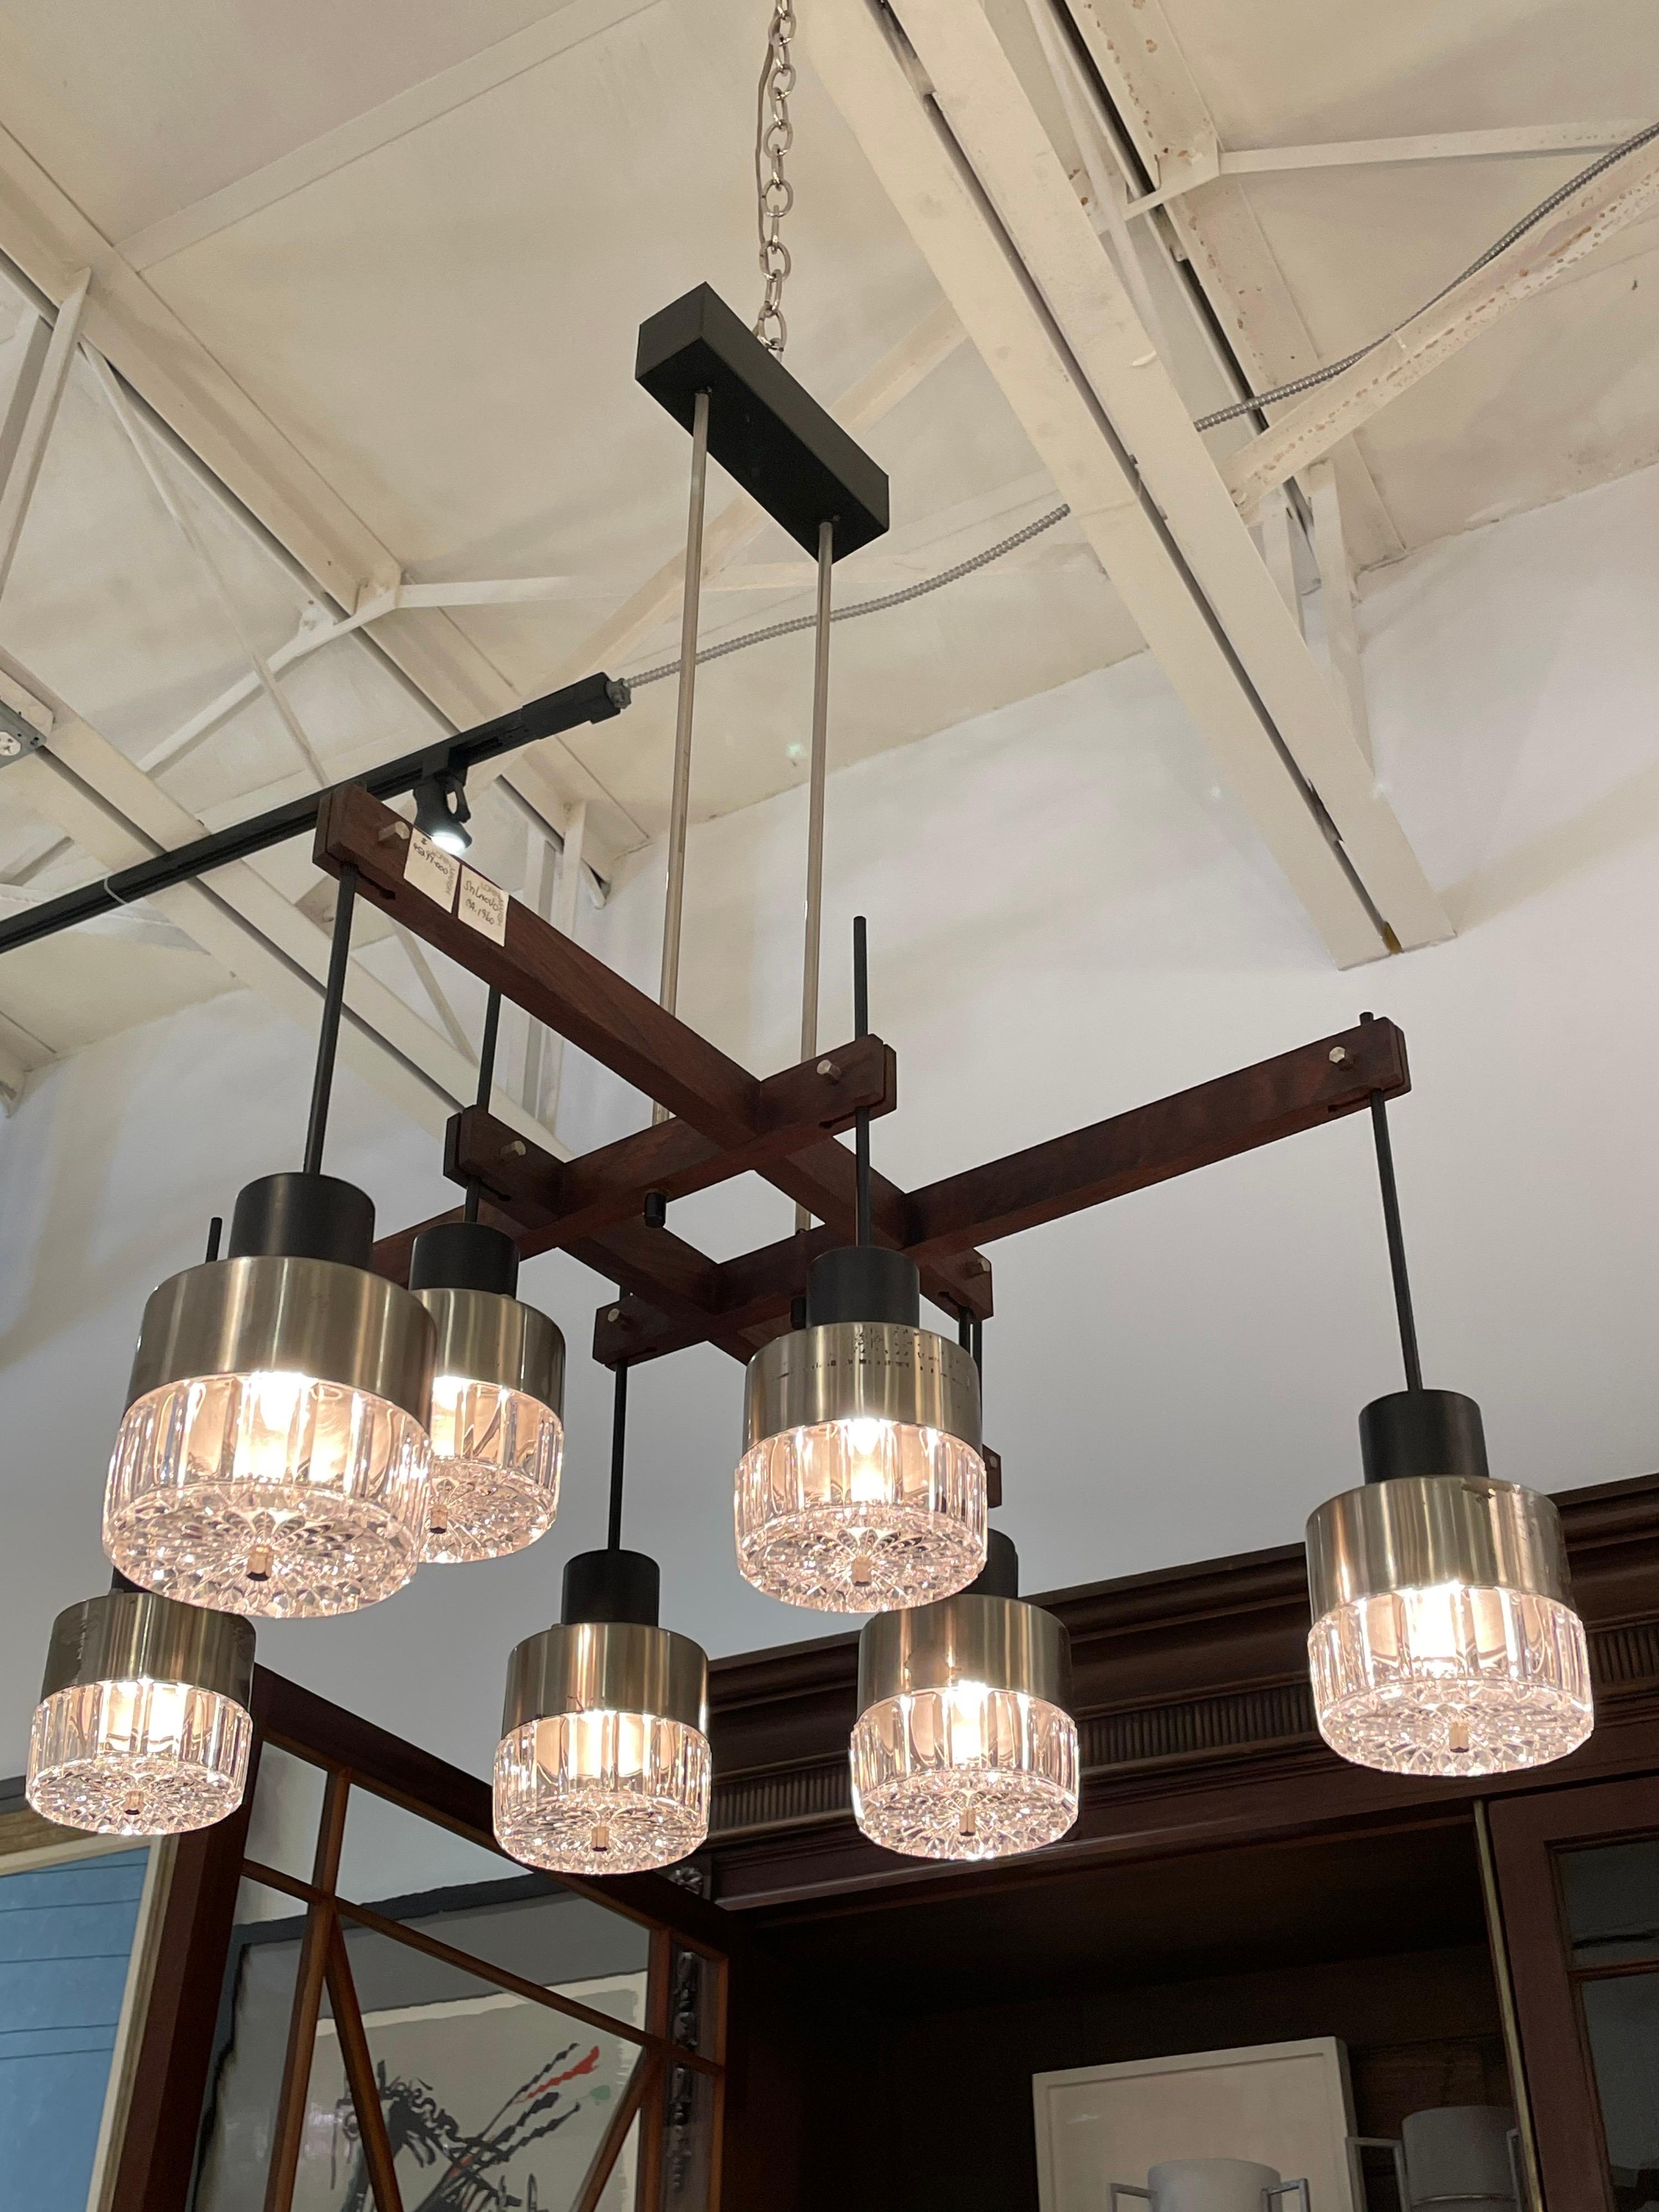 In the style of Stilnovo, this wonderful 8 light glass, walnut and metal chandelier with original canopy is extremely sculptural, geometric and modern for a classic mid-century light.